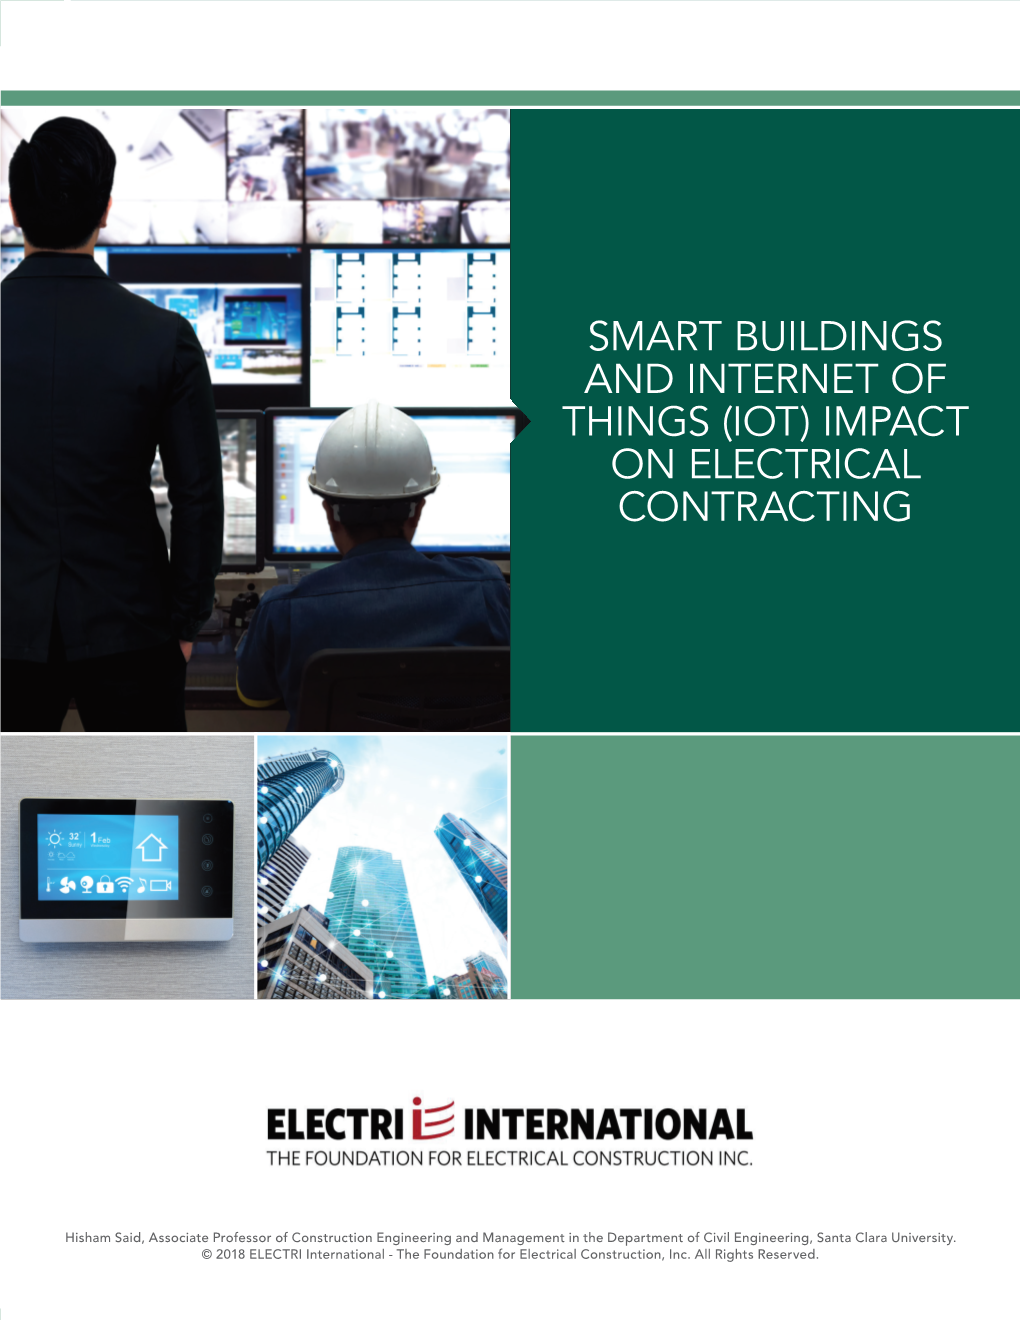 Smart Buildings and Internet of Things (Iot) Impact on Electrical Contracting